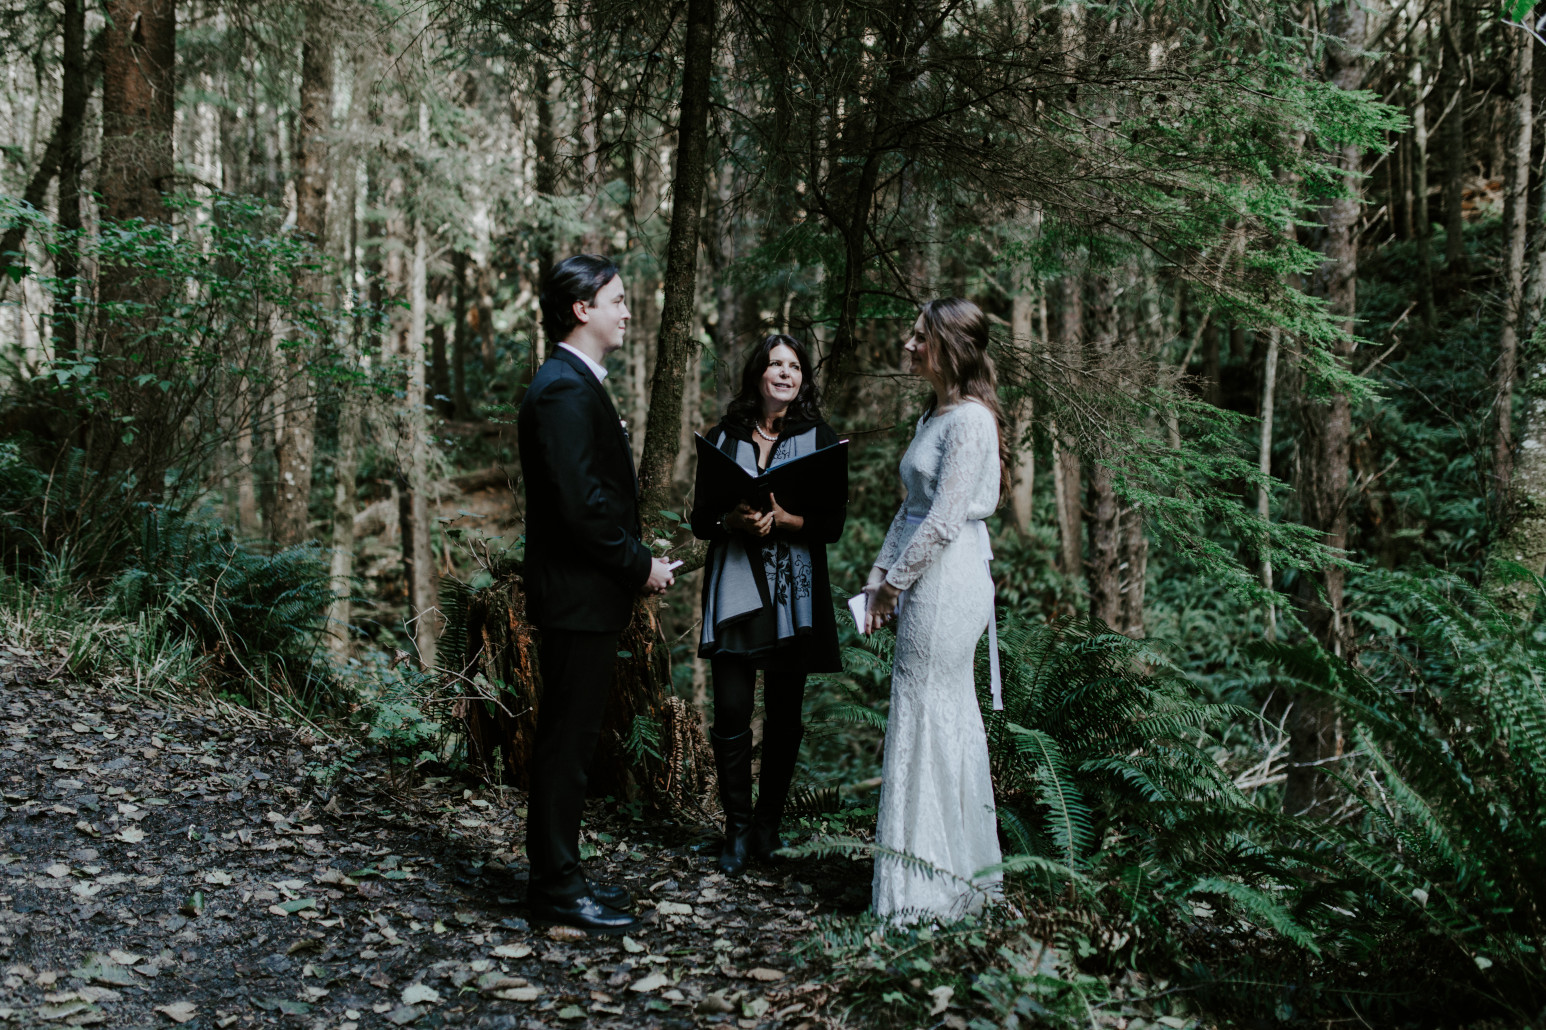 Nicole and Vlad during their wedding ceremony at Cannon Beach. Elopement wedding photography at Cannon Beach by Sienna Plus Josh.